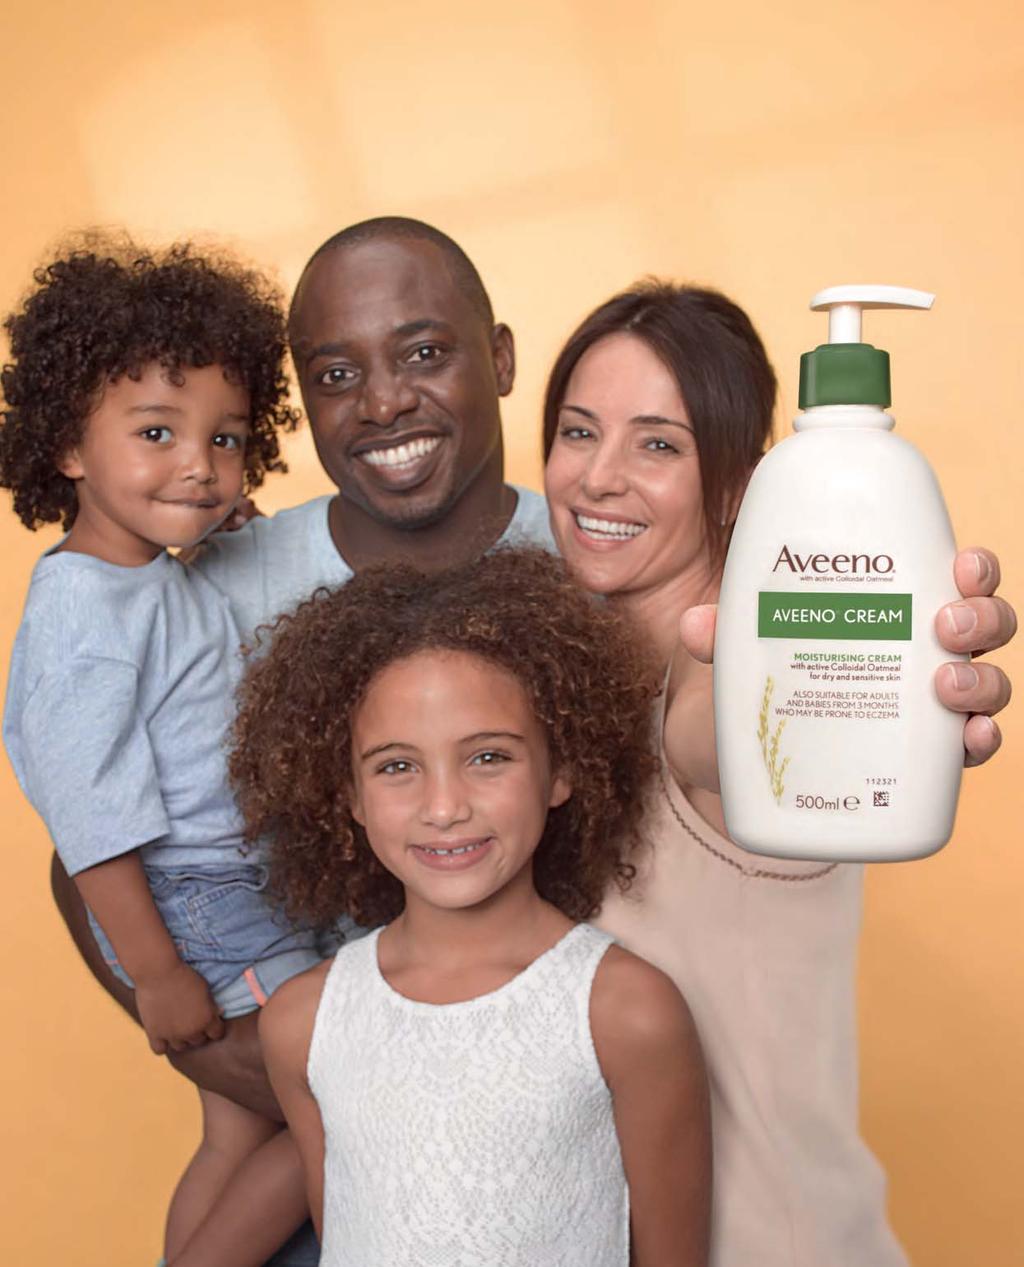 AVEENO CREAM For proven positive patient outcomes New 500ml Suitable for all skin types and all ages from 3 months, 1,2 AVEENO products are preferred by many patients 3,4 and can help improve